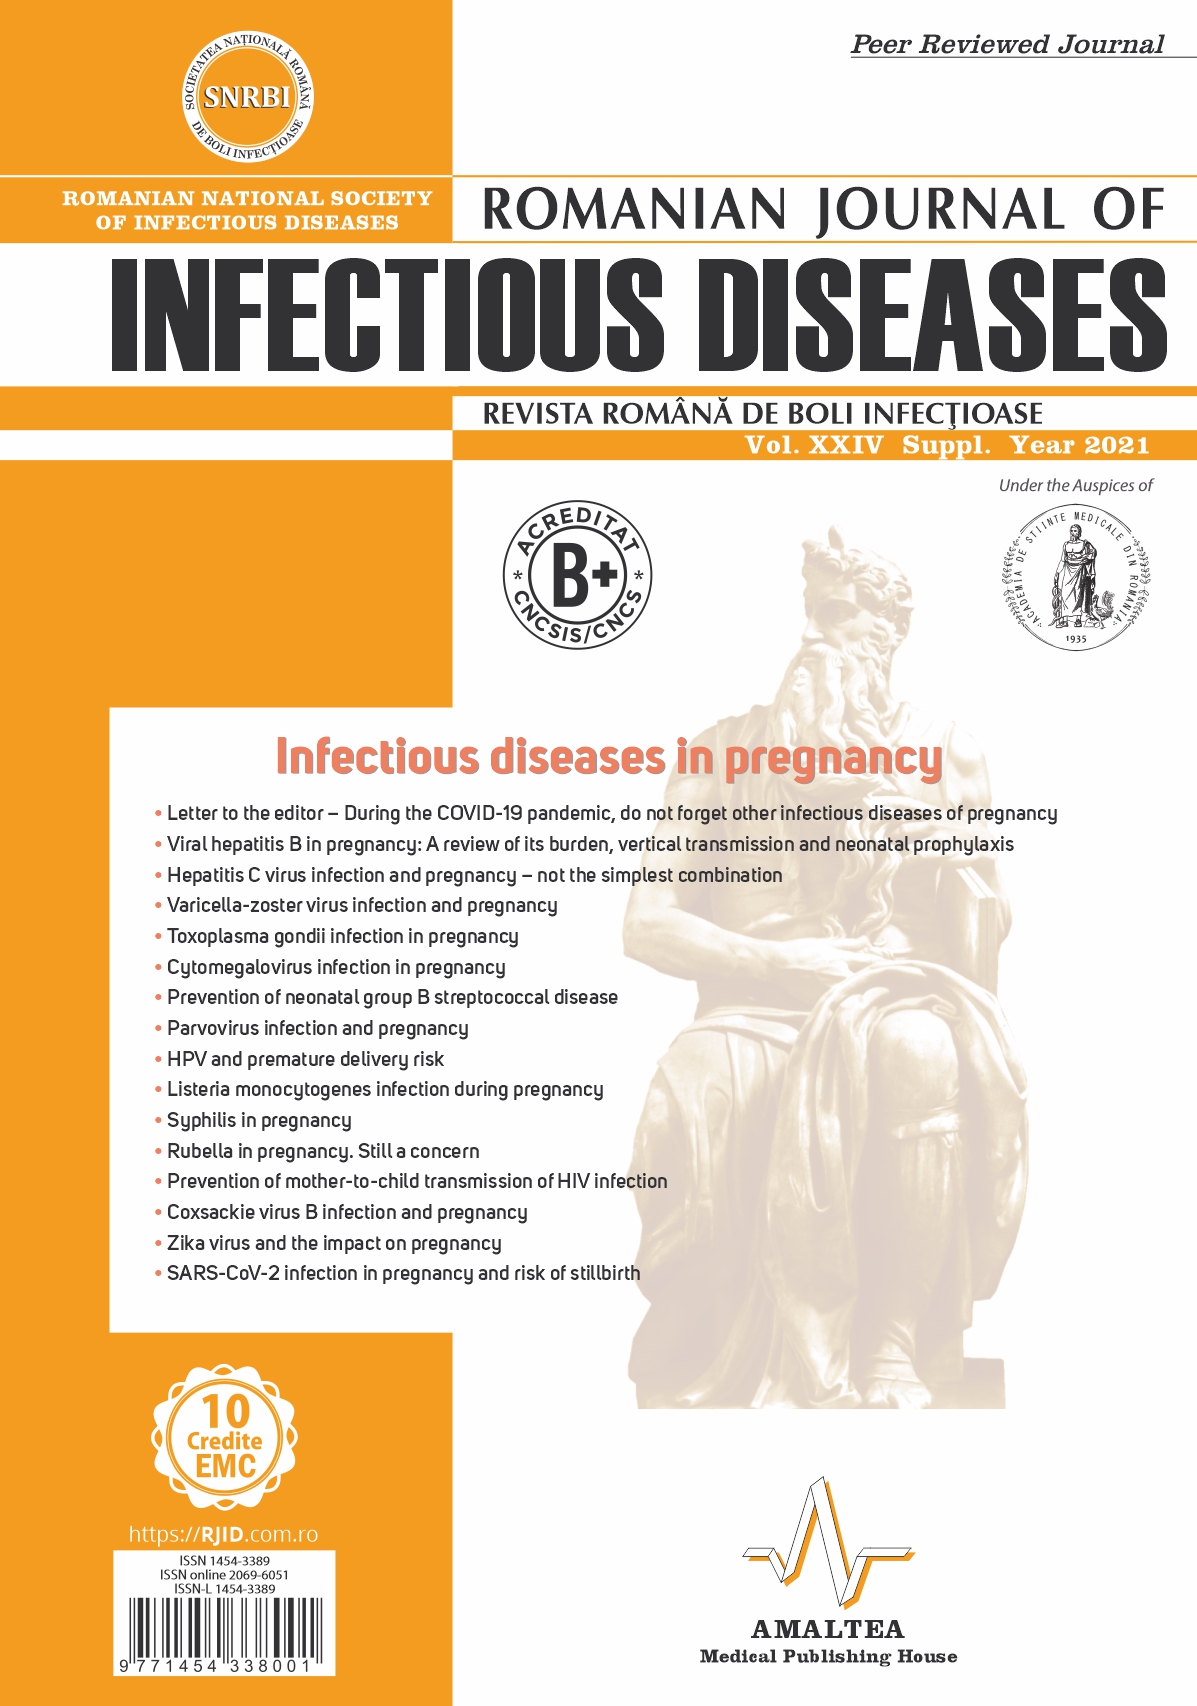 Romanian Journal of Infectious Diseases | Vol. XXIV, Suppl., 2021